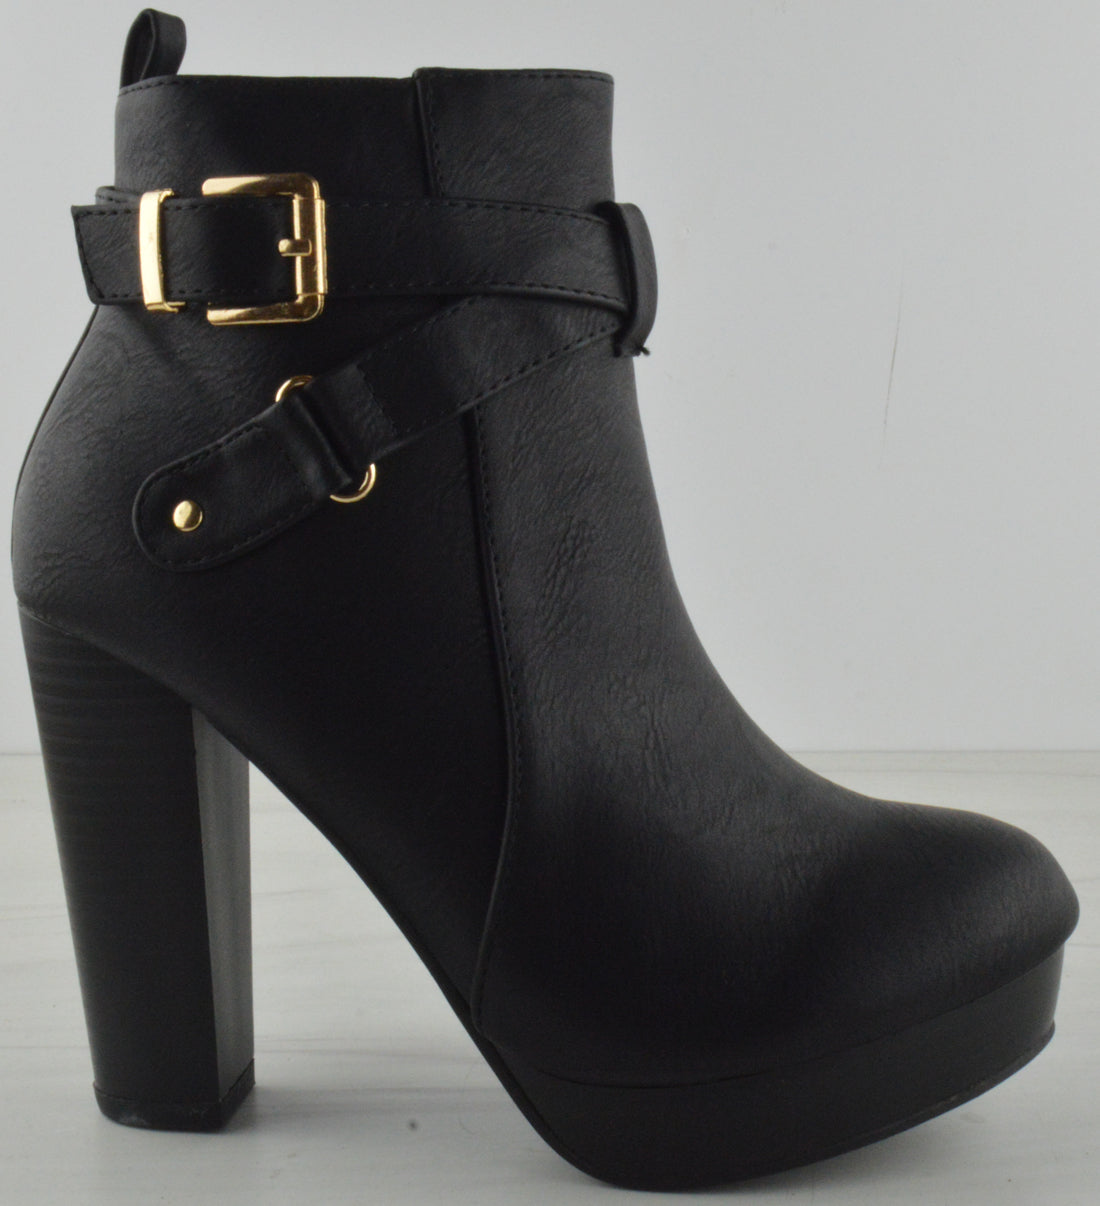 Valencia 1 Womens Buckle Embellished Heeled Ankle Boots